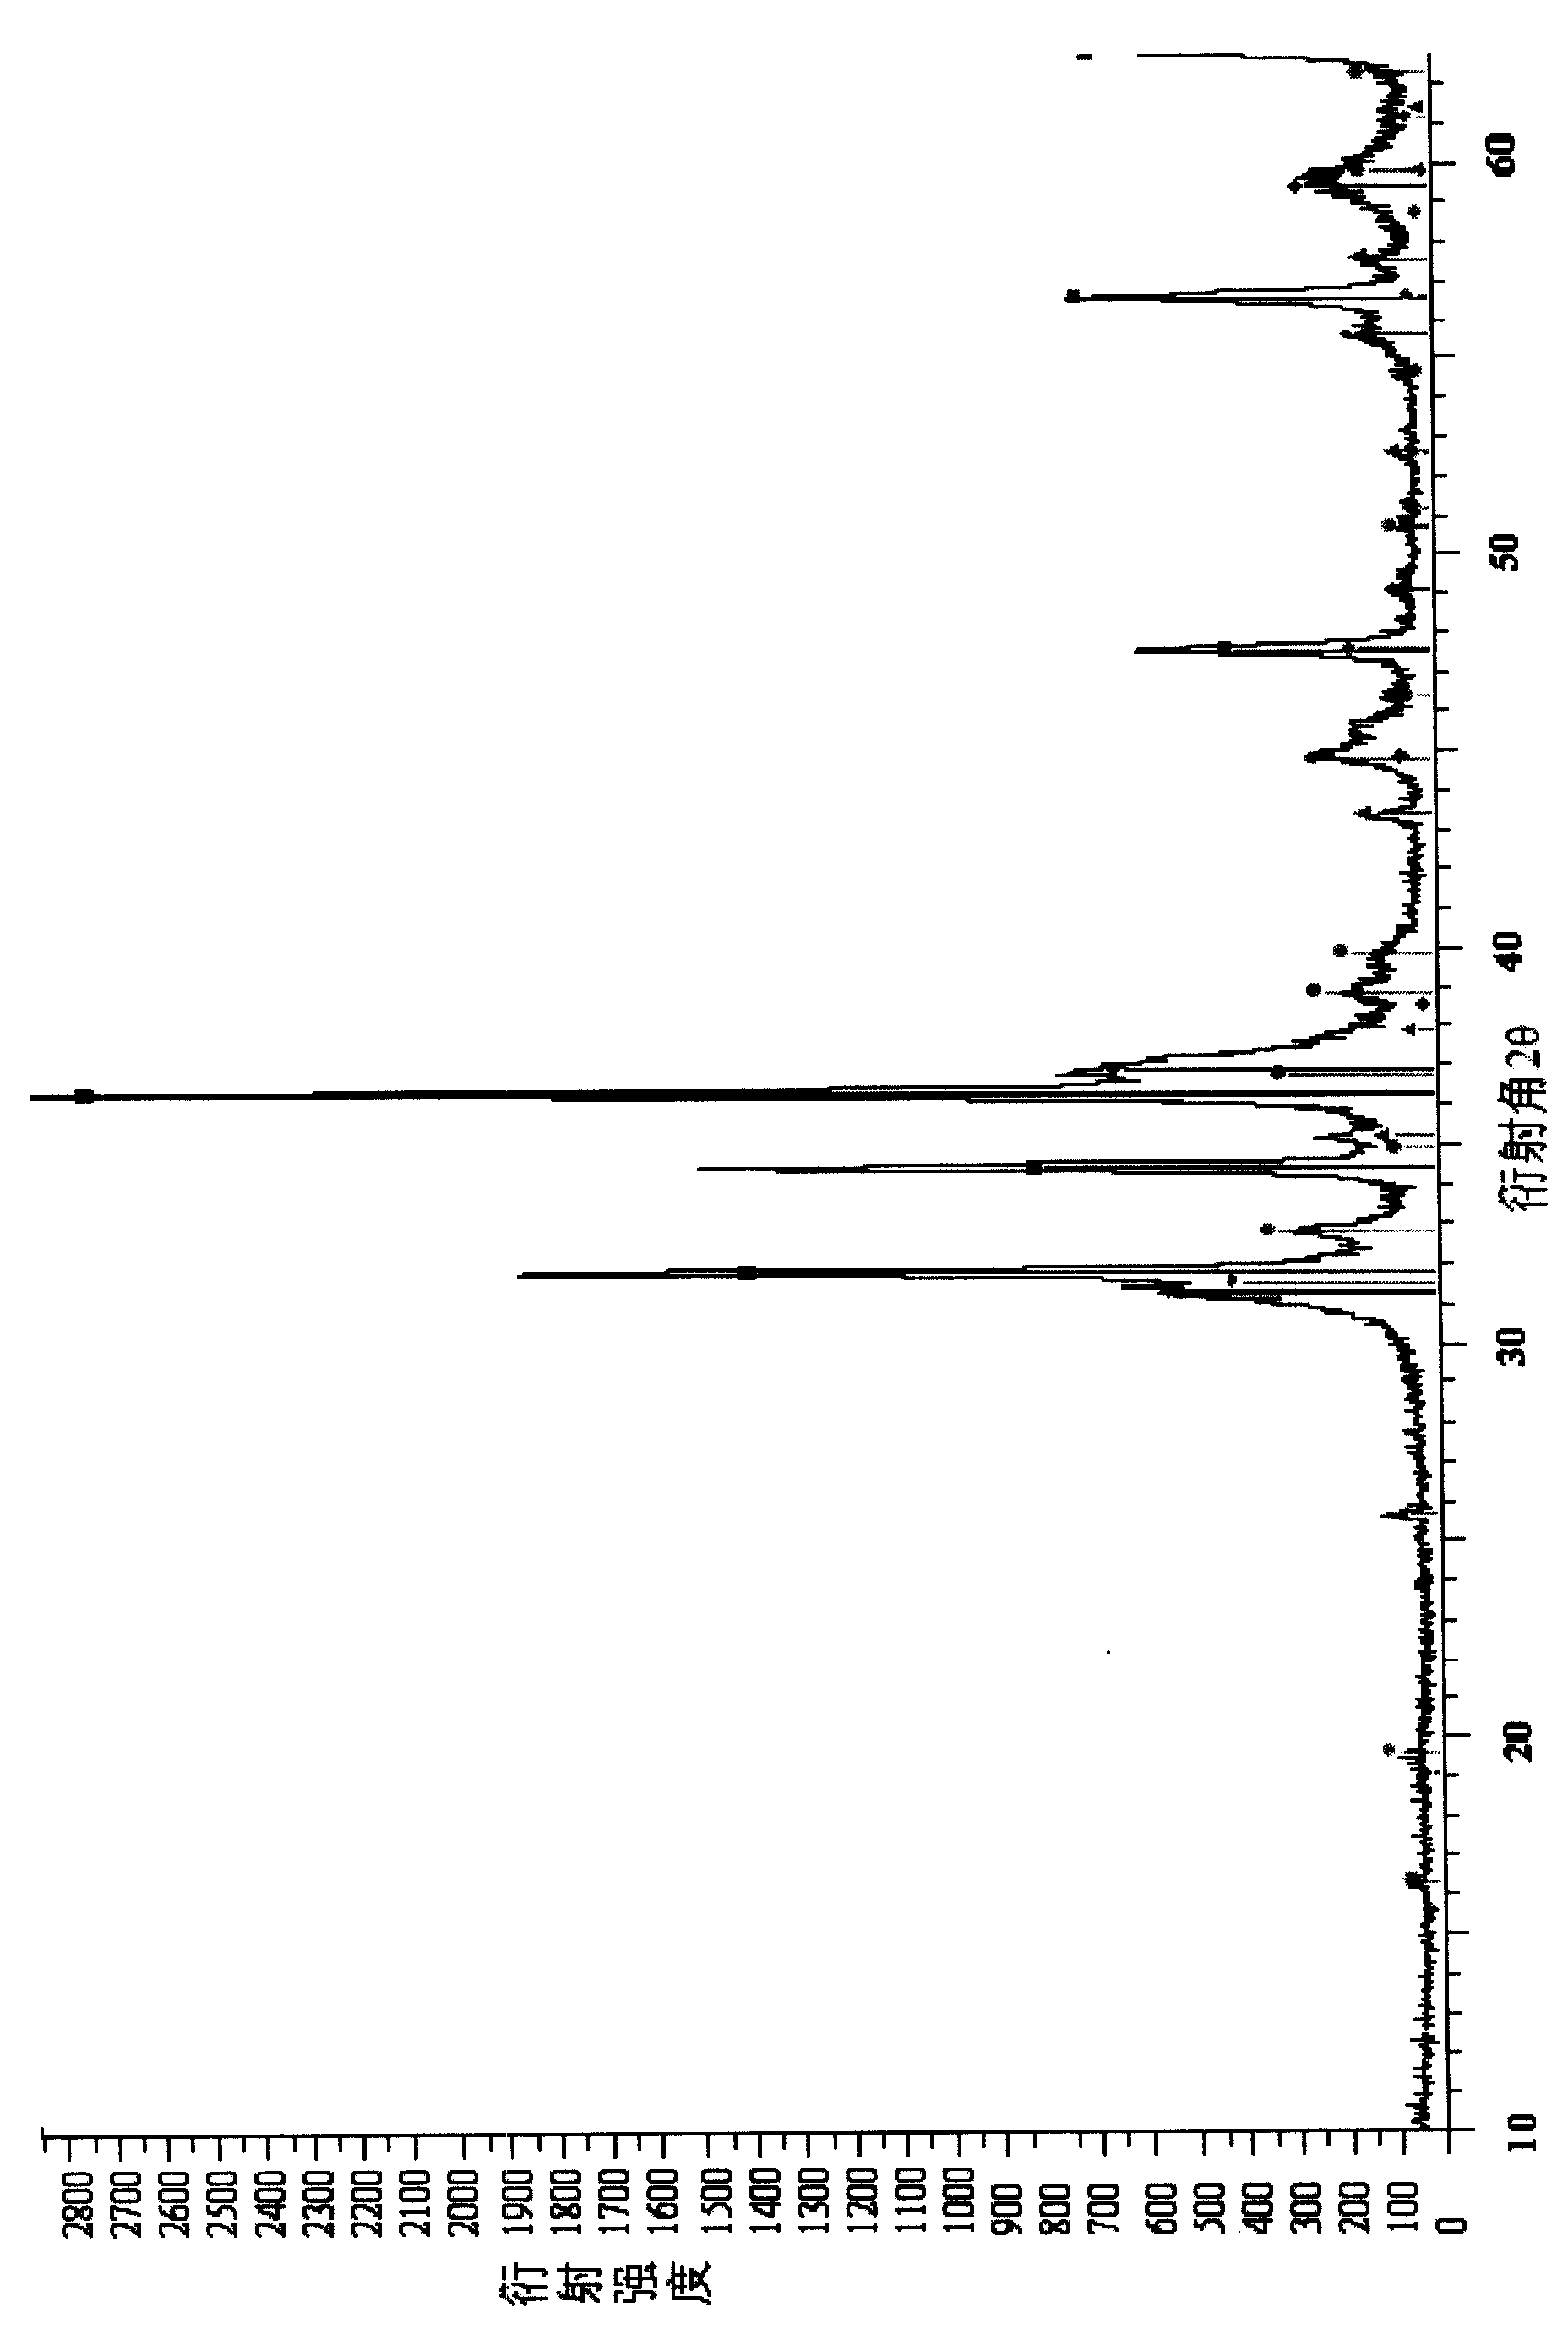 Catalyst for preparing dimethyl carbonate by using urea alcoholysis and preparation method thereof